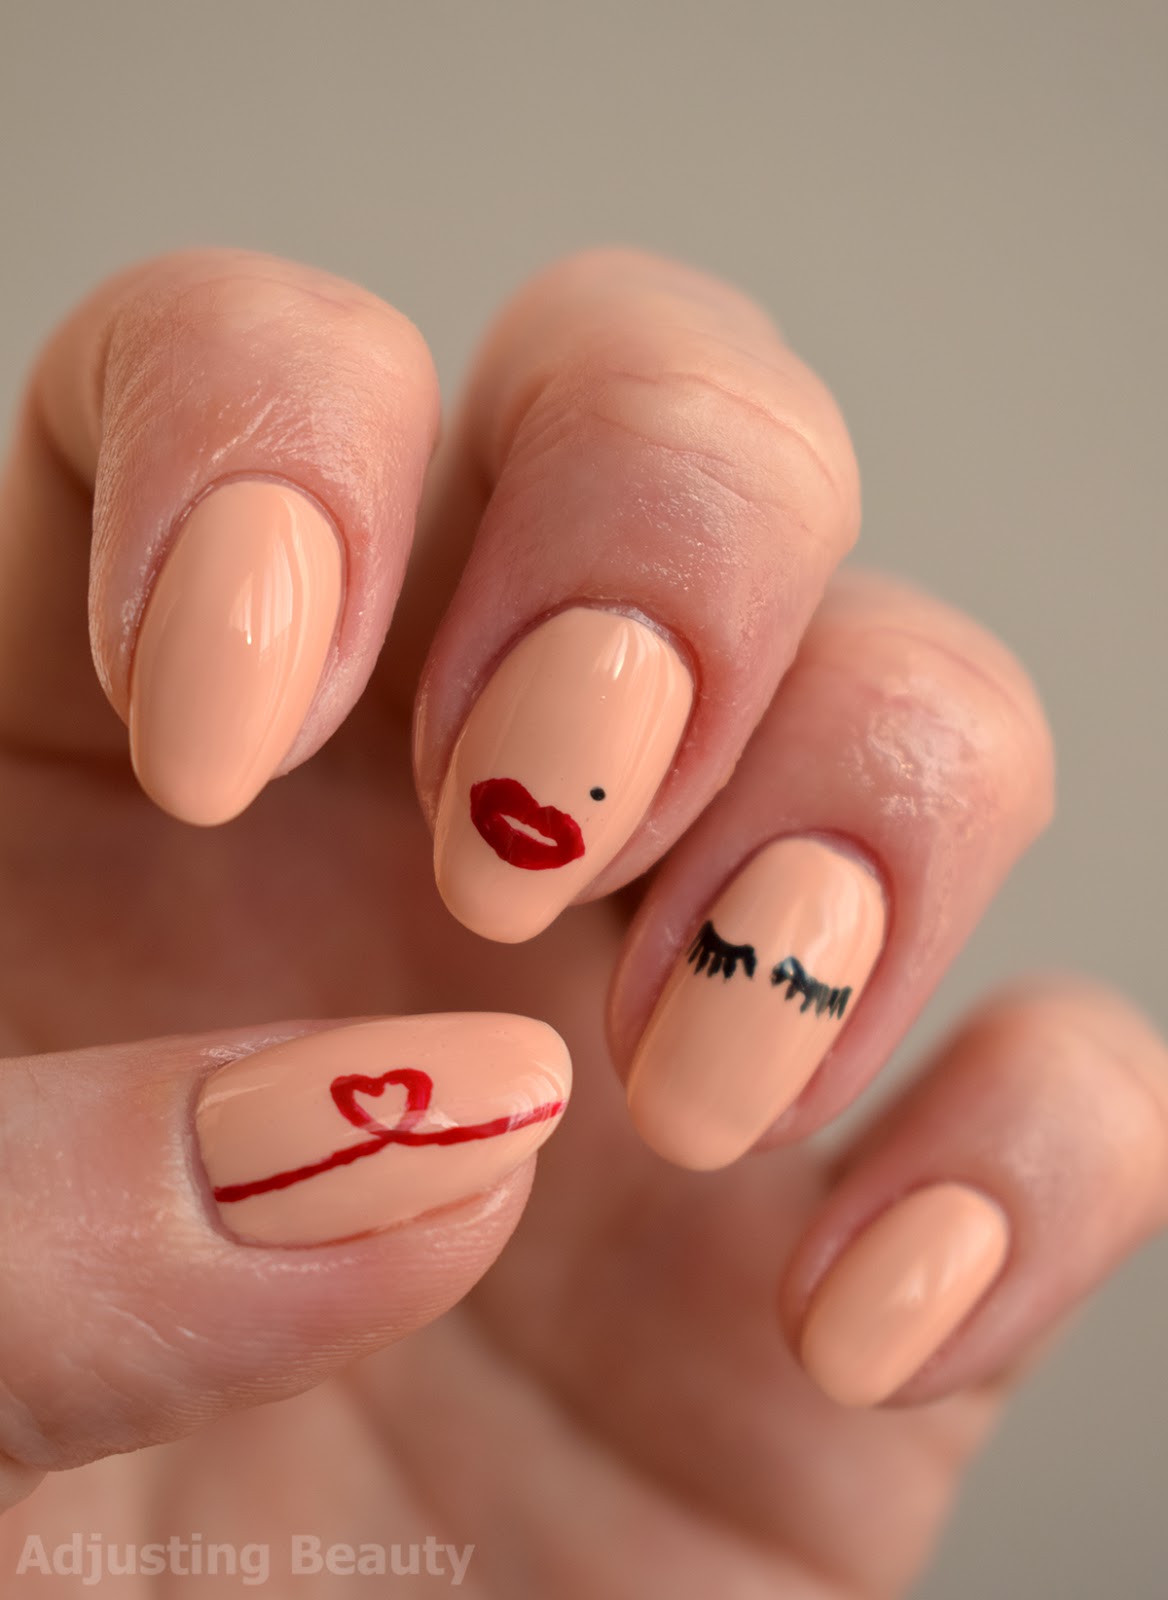 Is nail polish considered to be a type of makeup? - Quora